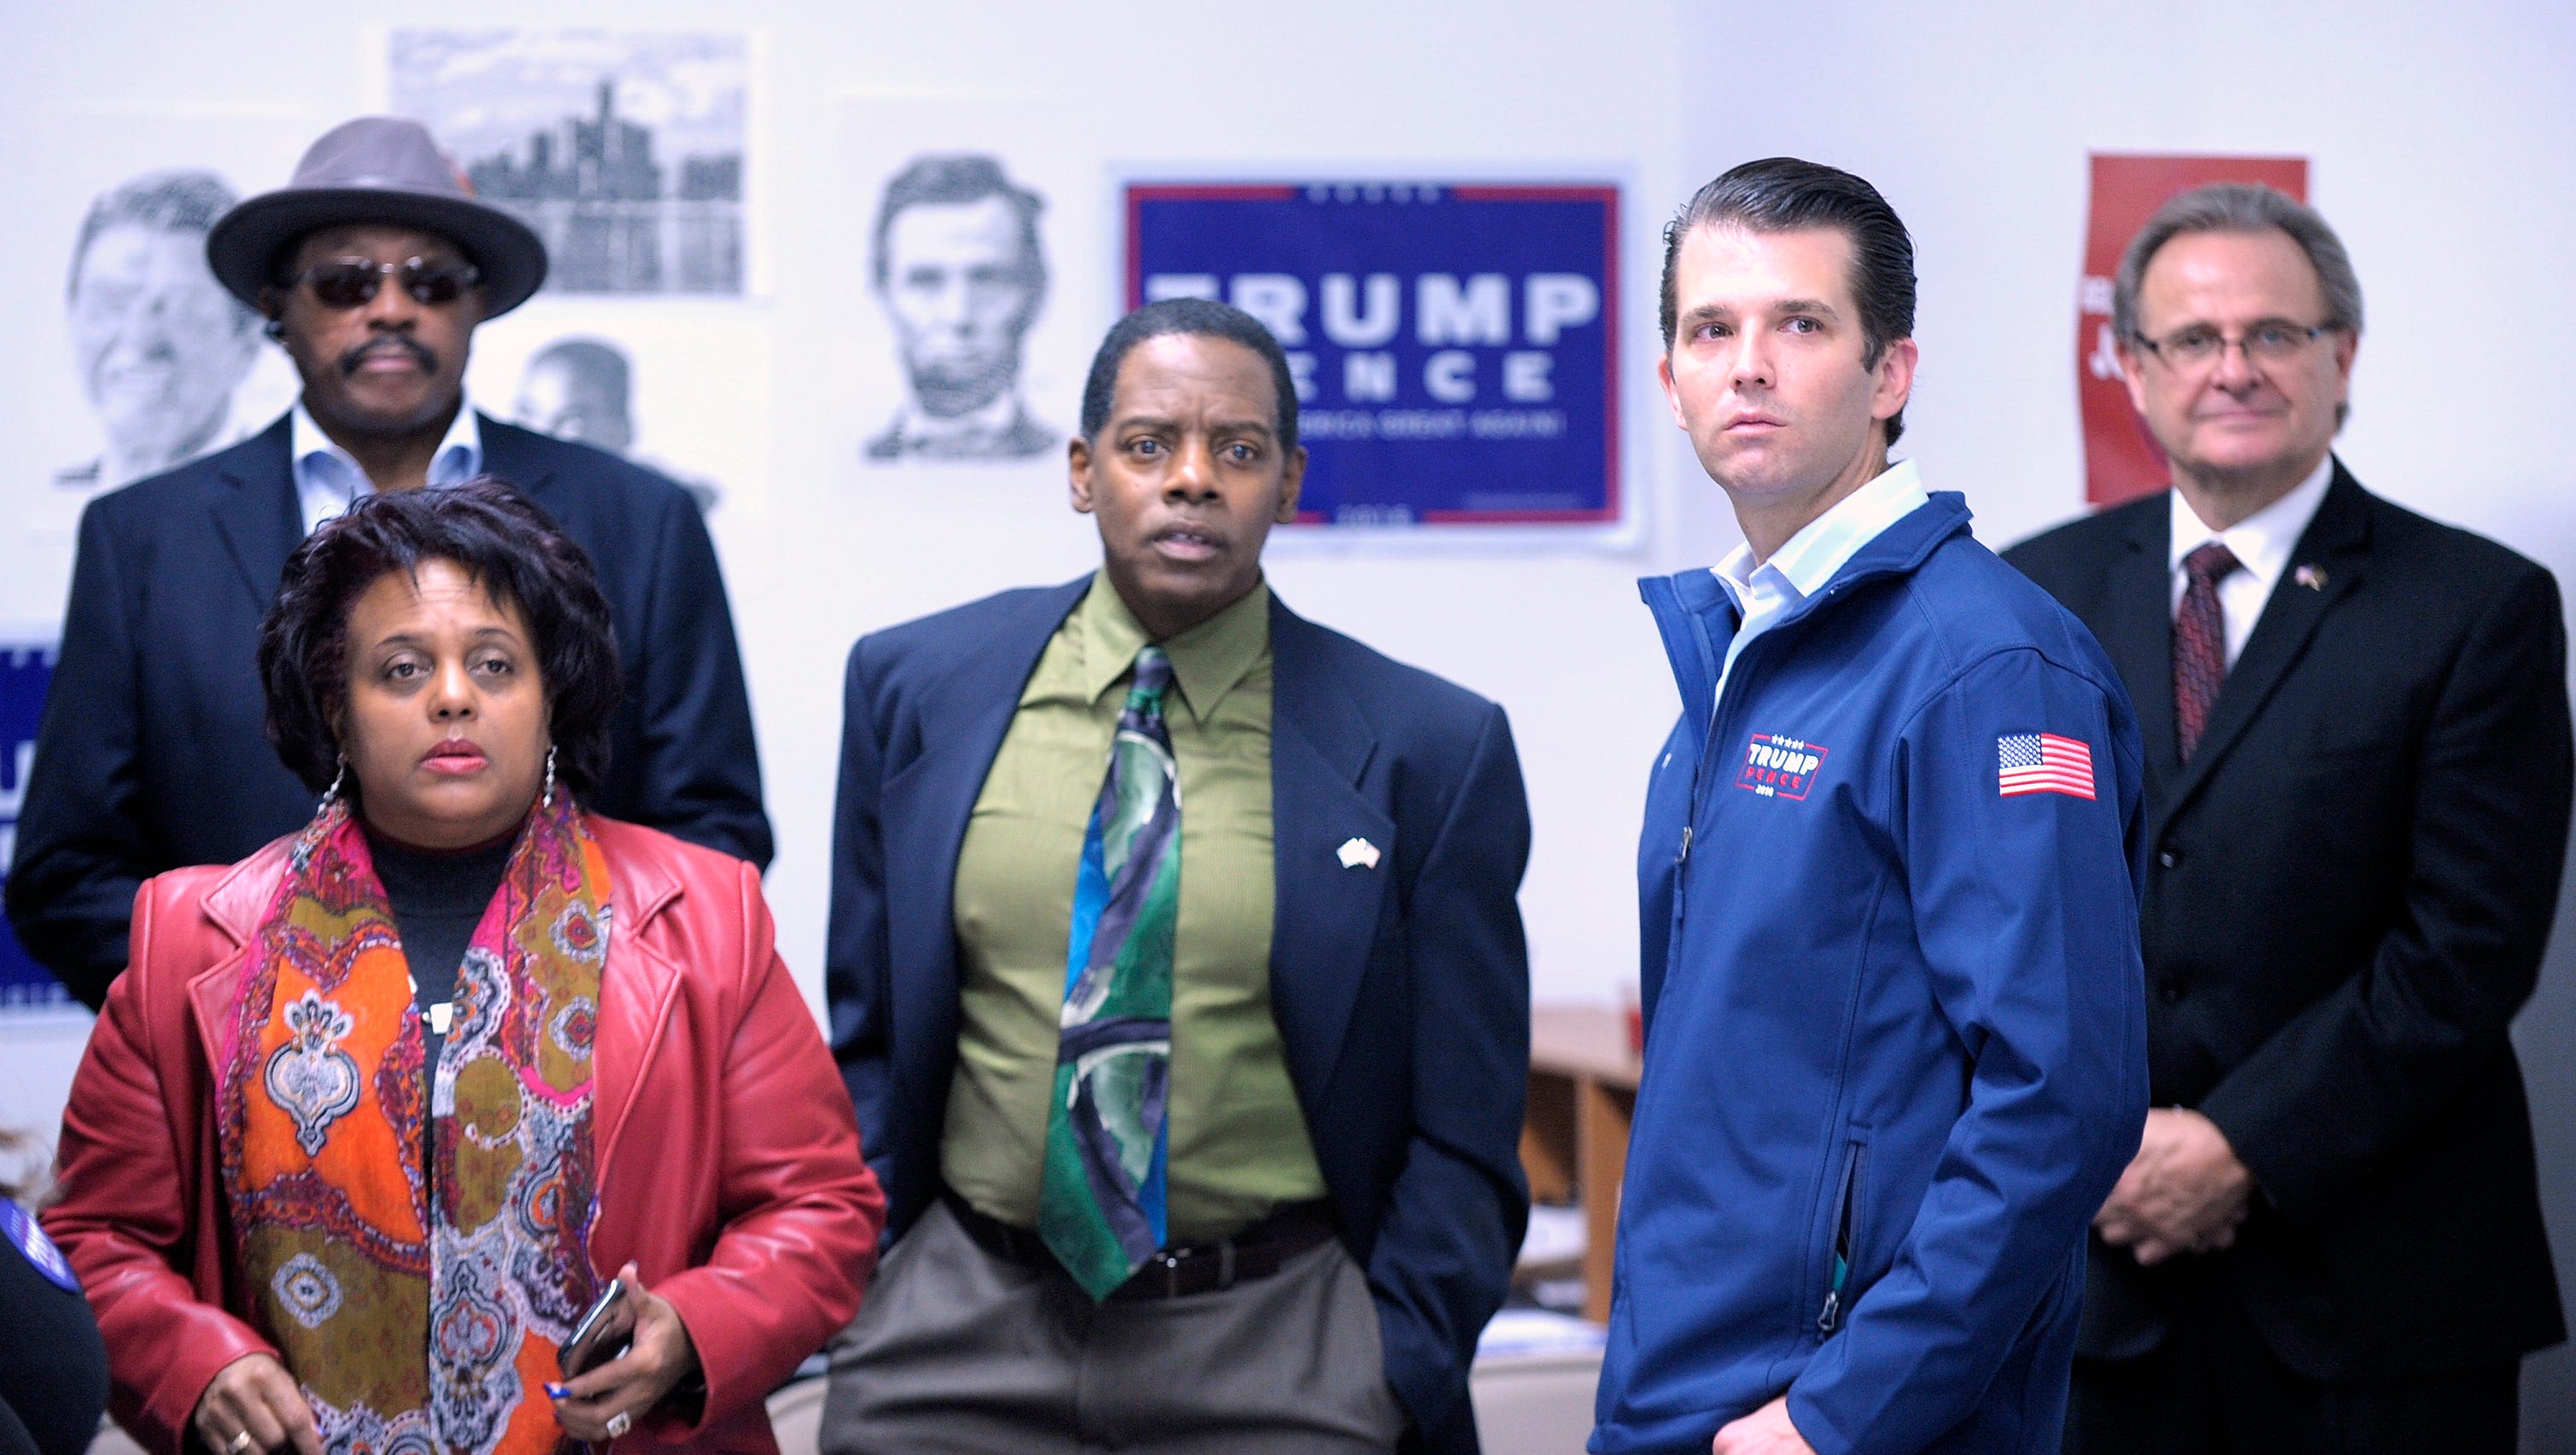 Donald Trump Jr., right, radio commentator, Ron Edwards, center, and his wife, Denise Edwards, left, both of Royal Oak, talk before the event. More than 30 people at the African American Community Leaders breakfast listen to Donald Trump Jr. campaign for his father, the Republican presidential candidate, at the Detroit Republican Party headquarters on Livernois near Seven Mile,  Nov. 2, 2016.